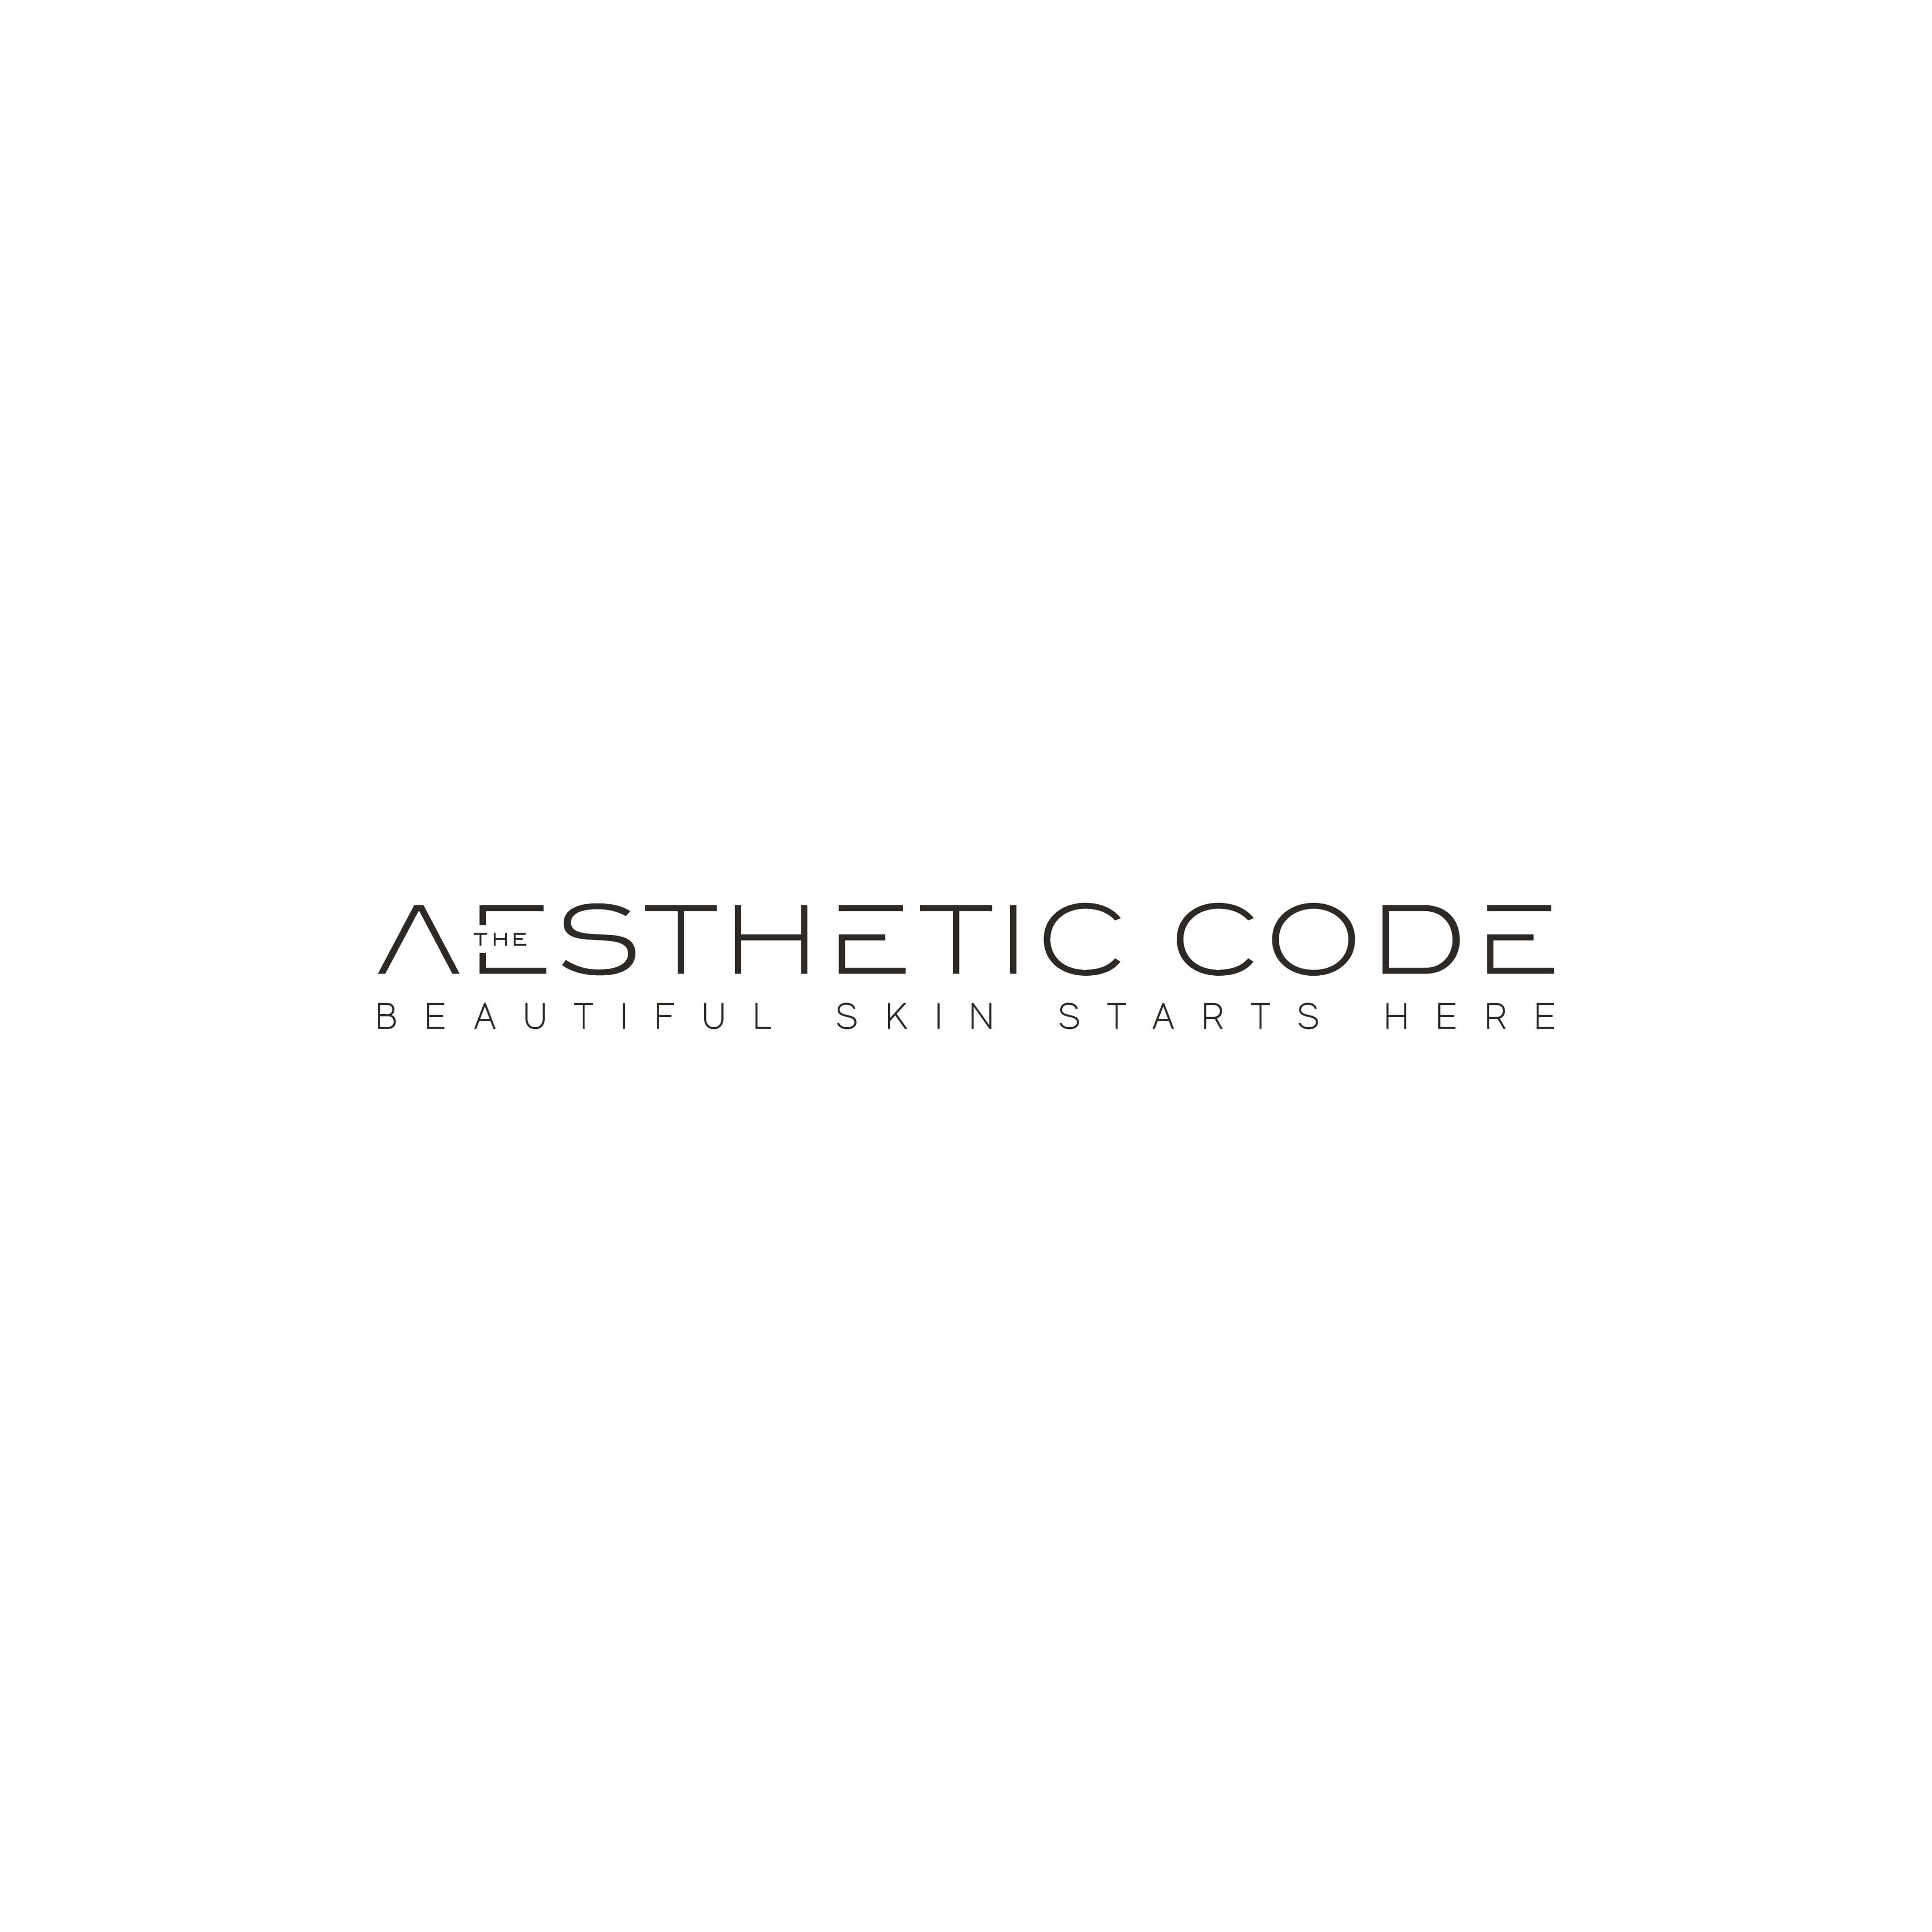 The Aesthetic Code